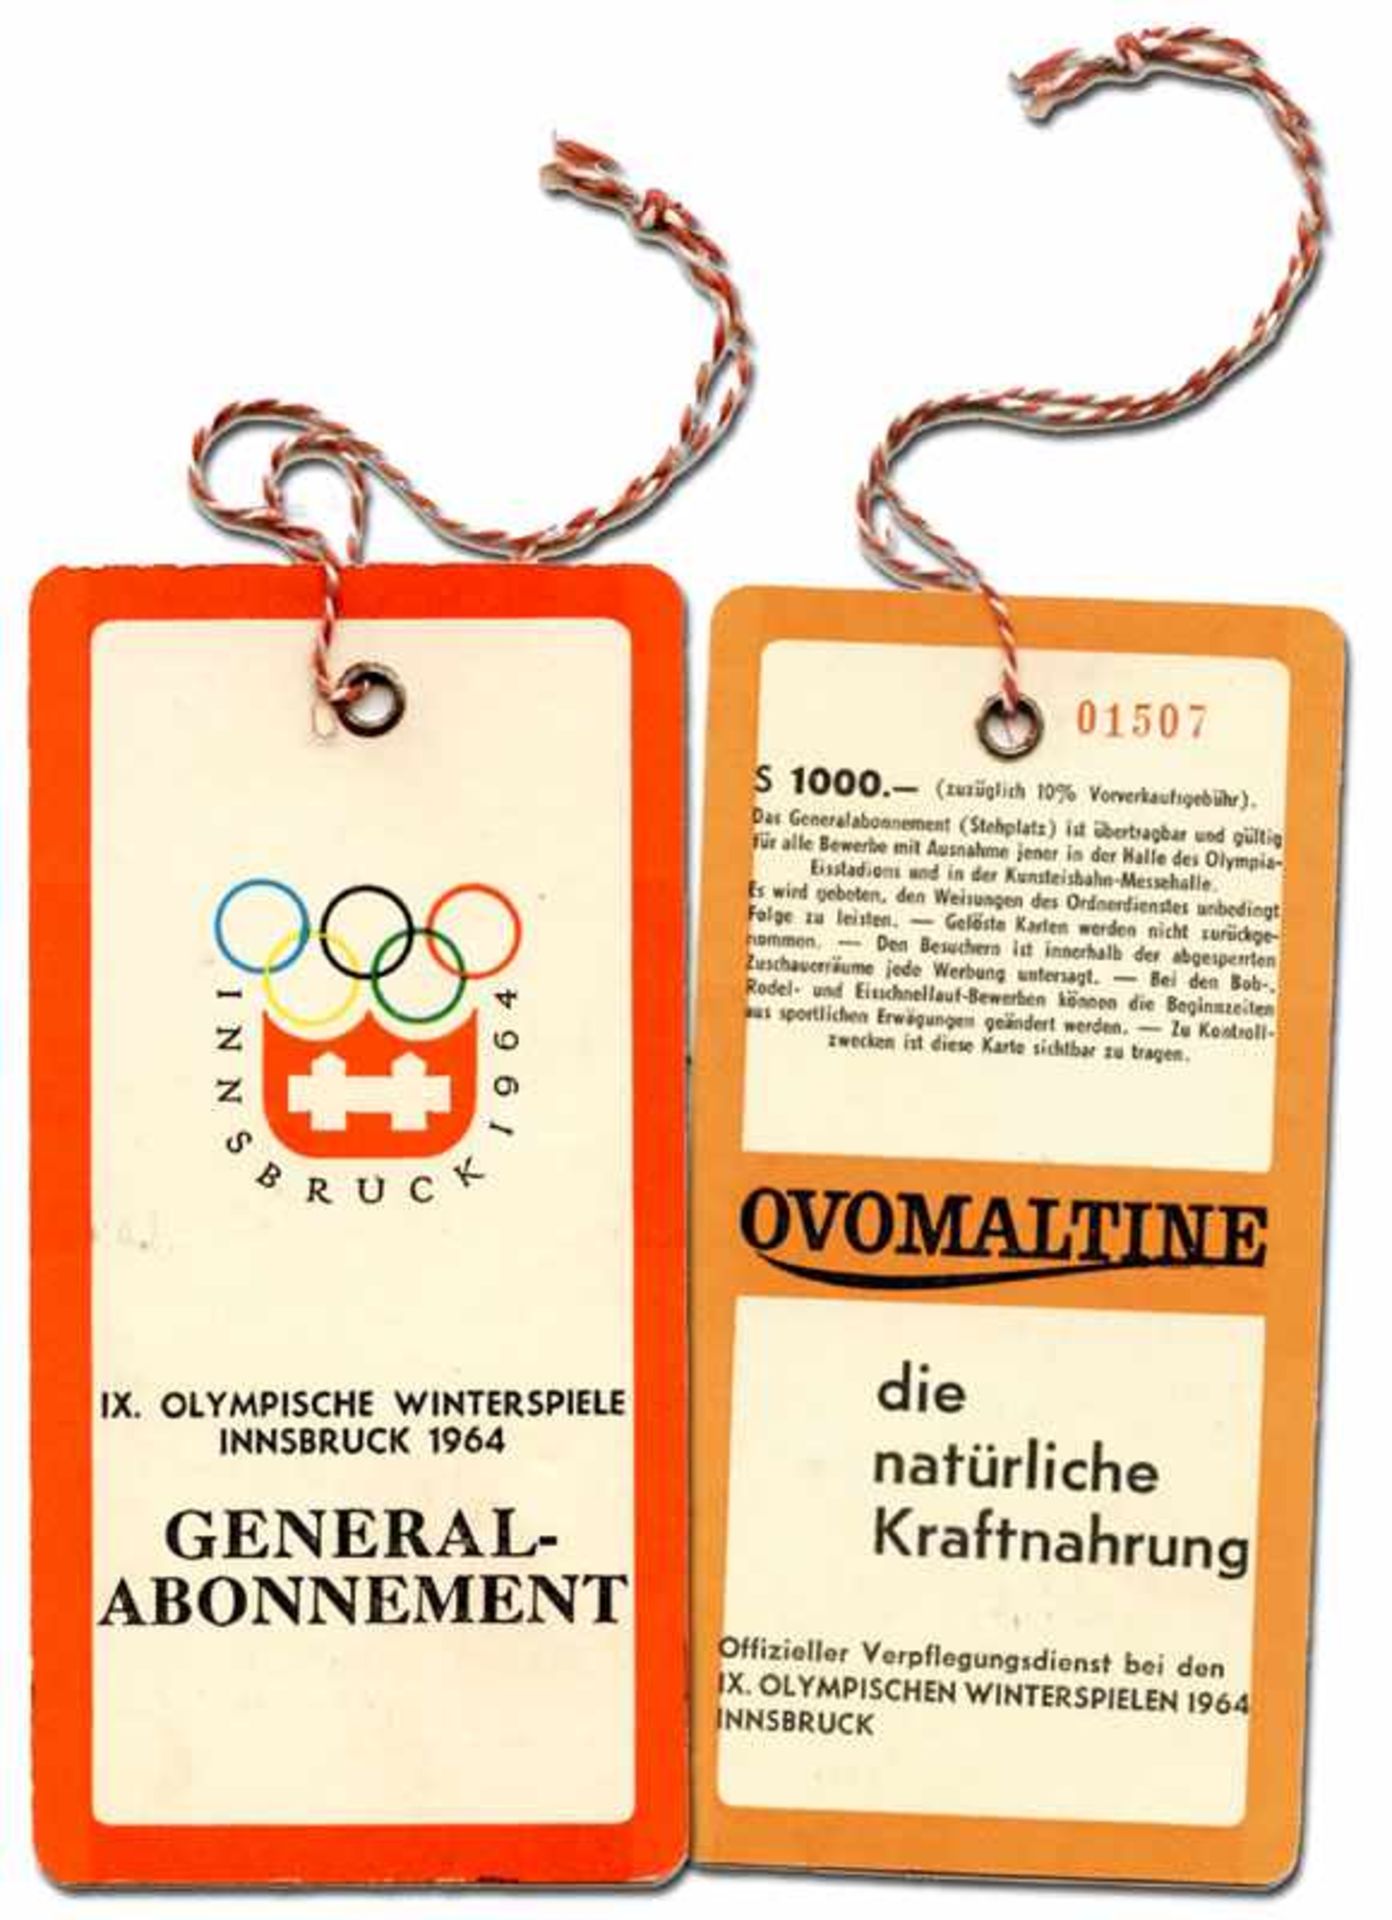 Olympic Games Innsbruck 1964 Season Ticket - Admission to all events, 12.3x5.9 cm. Extremly rare!